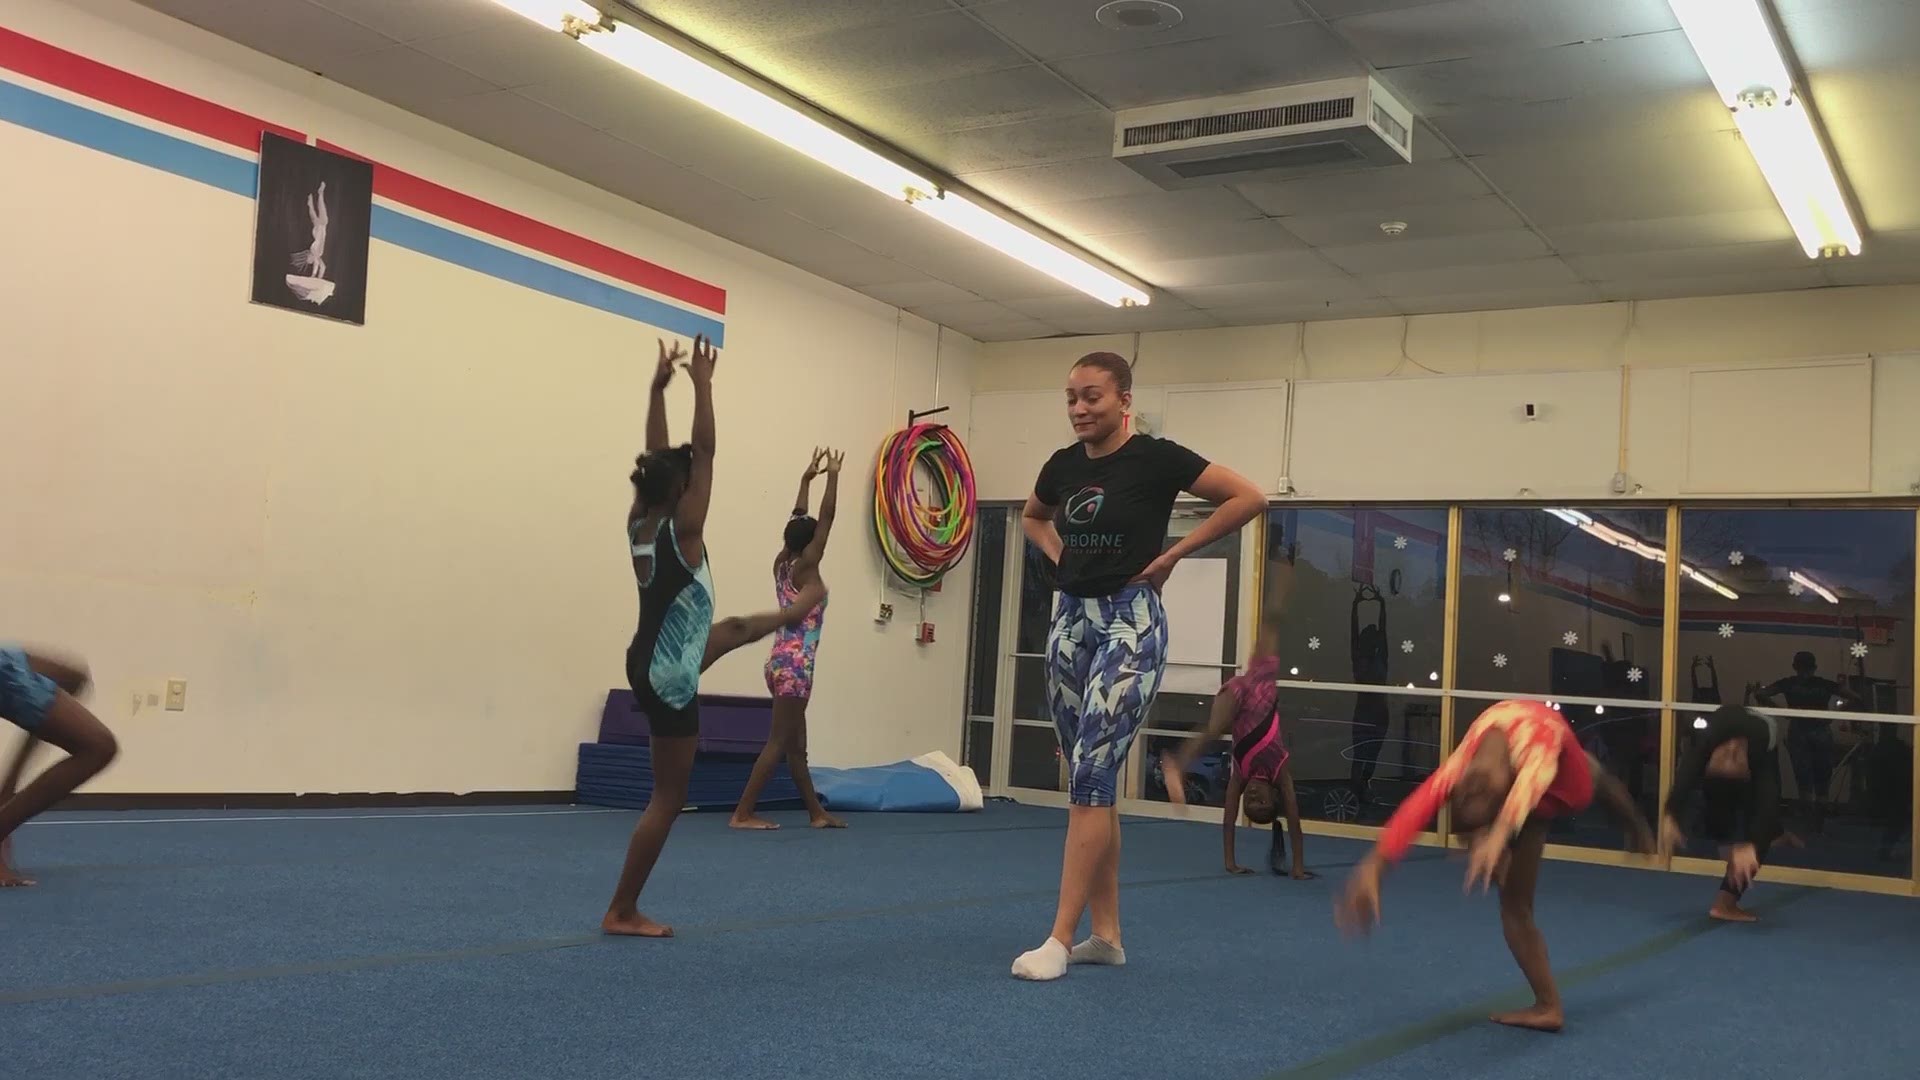 College Park Gymnastics studio is flipping the script on the southside